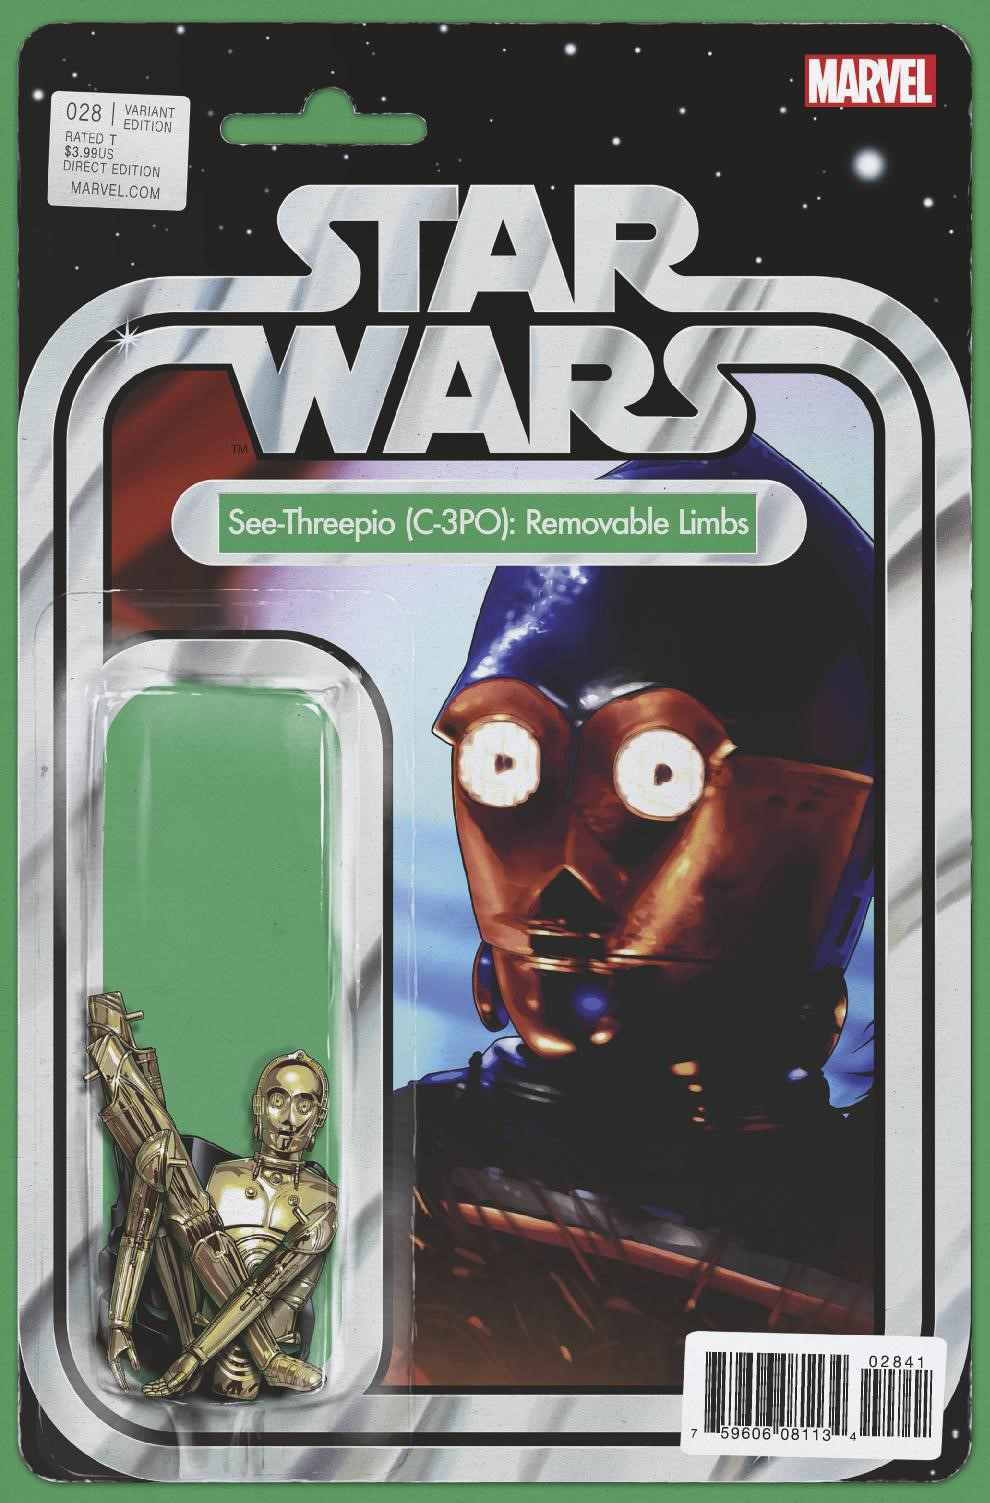 Star Wars #28 (Action Figure Variant Cover) (01.02.2017)